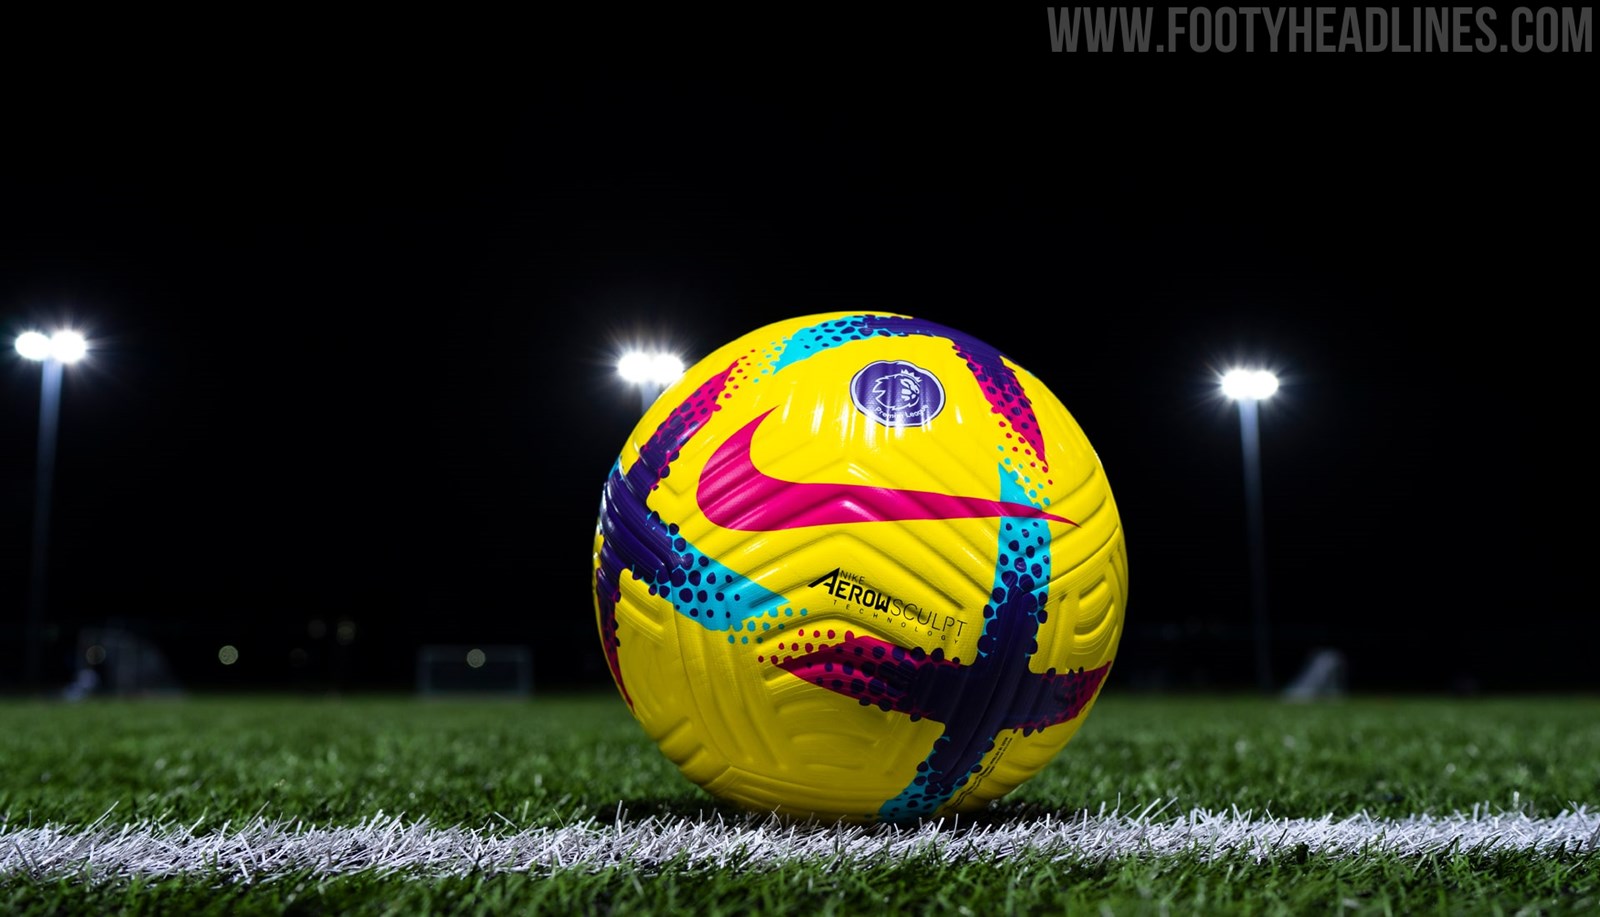 Adidas 22-23 Champions League Ball Released - Footy Headlines